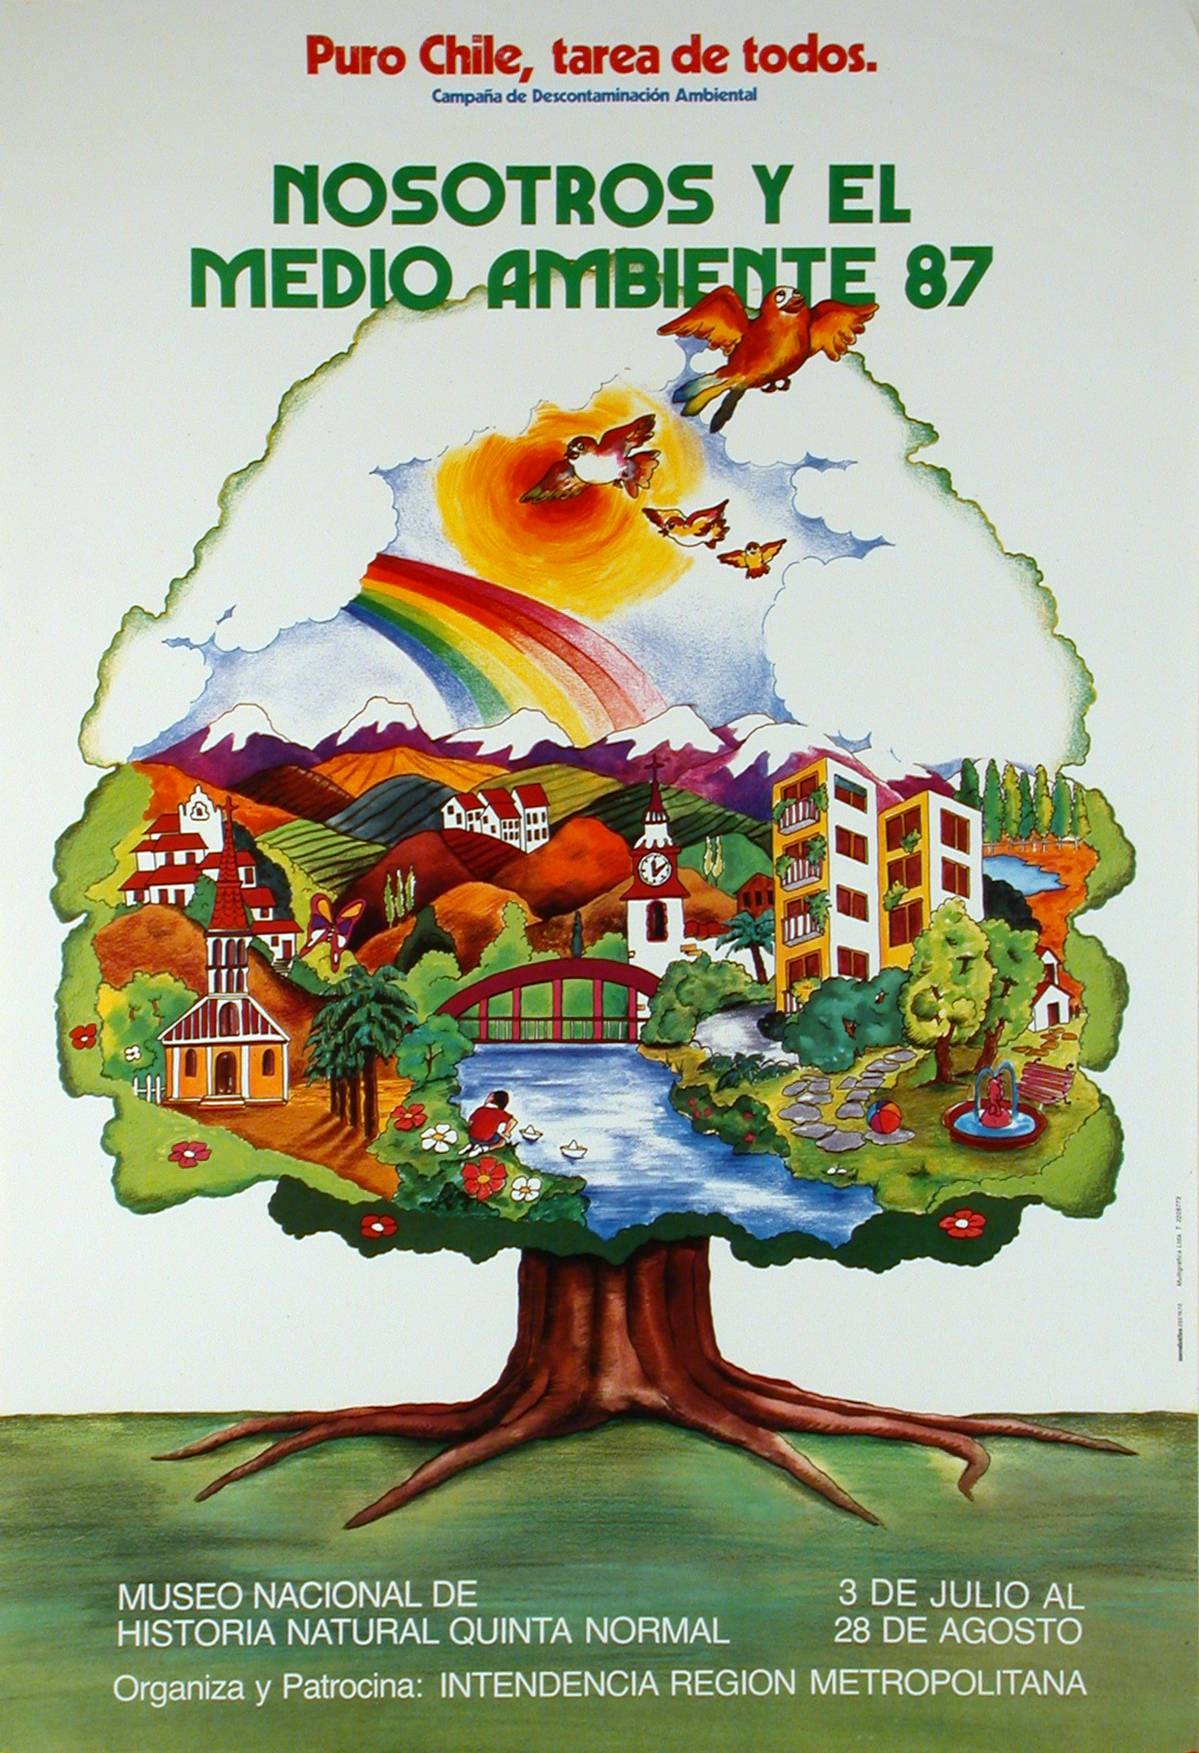 Image of a tree and inside the tree are images of a healthy environment, including a rainbow, white clouds, a healthy river, some countryside imagery, and buildings.